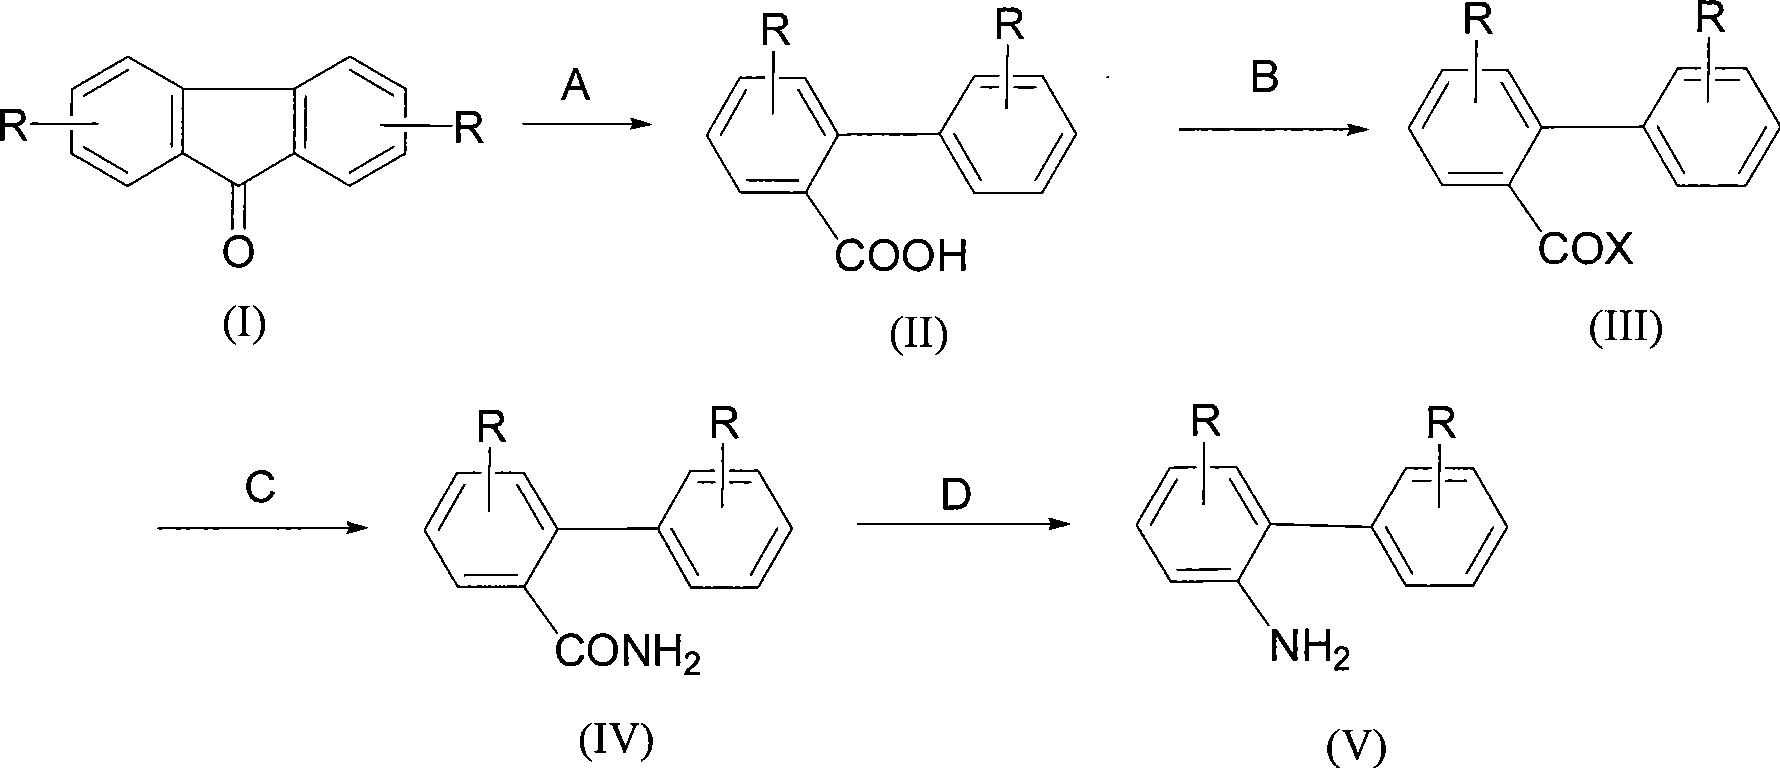 Synthesis of 2-aminobiphenyl compounds